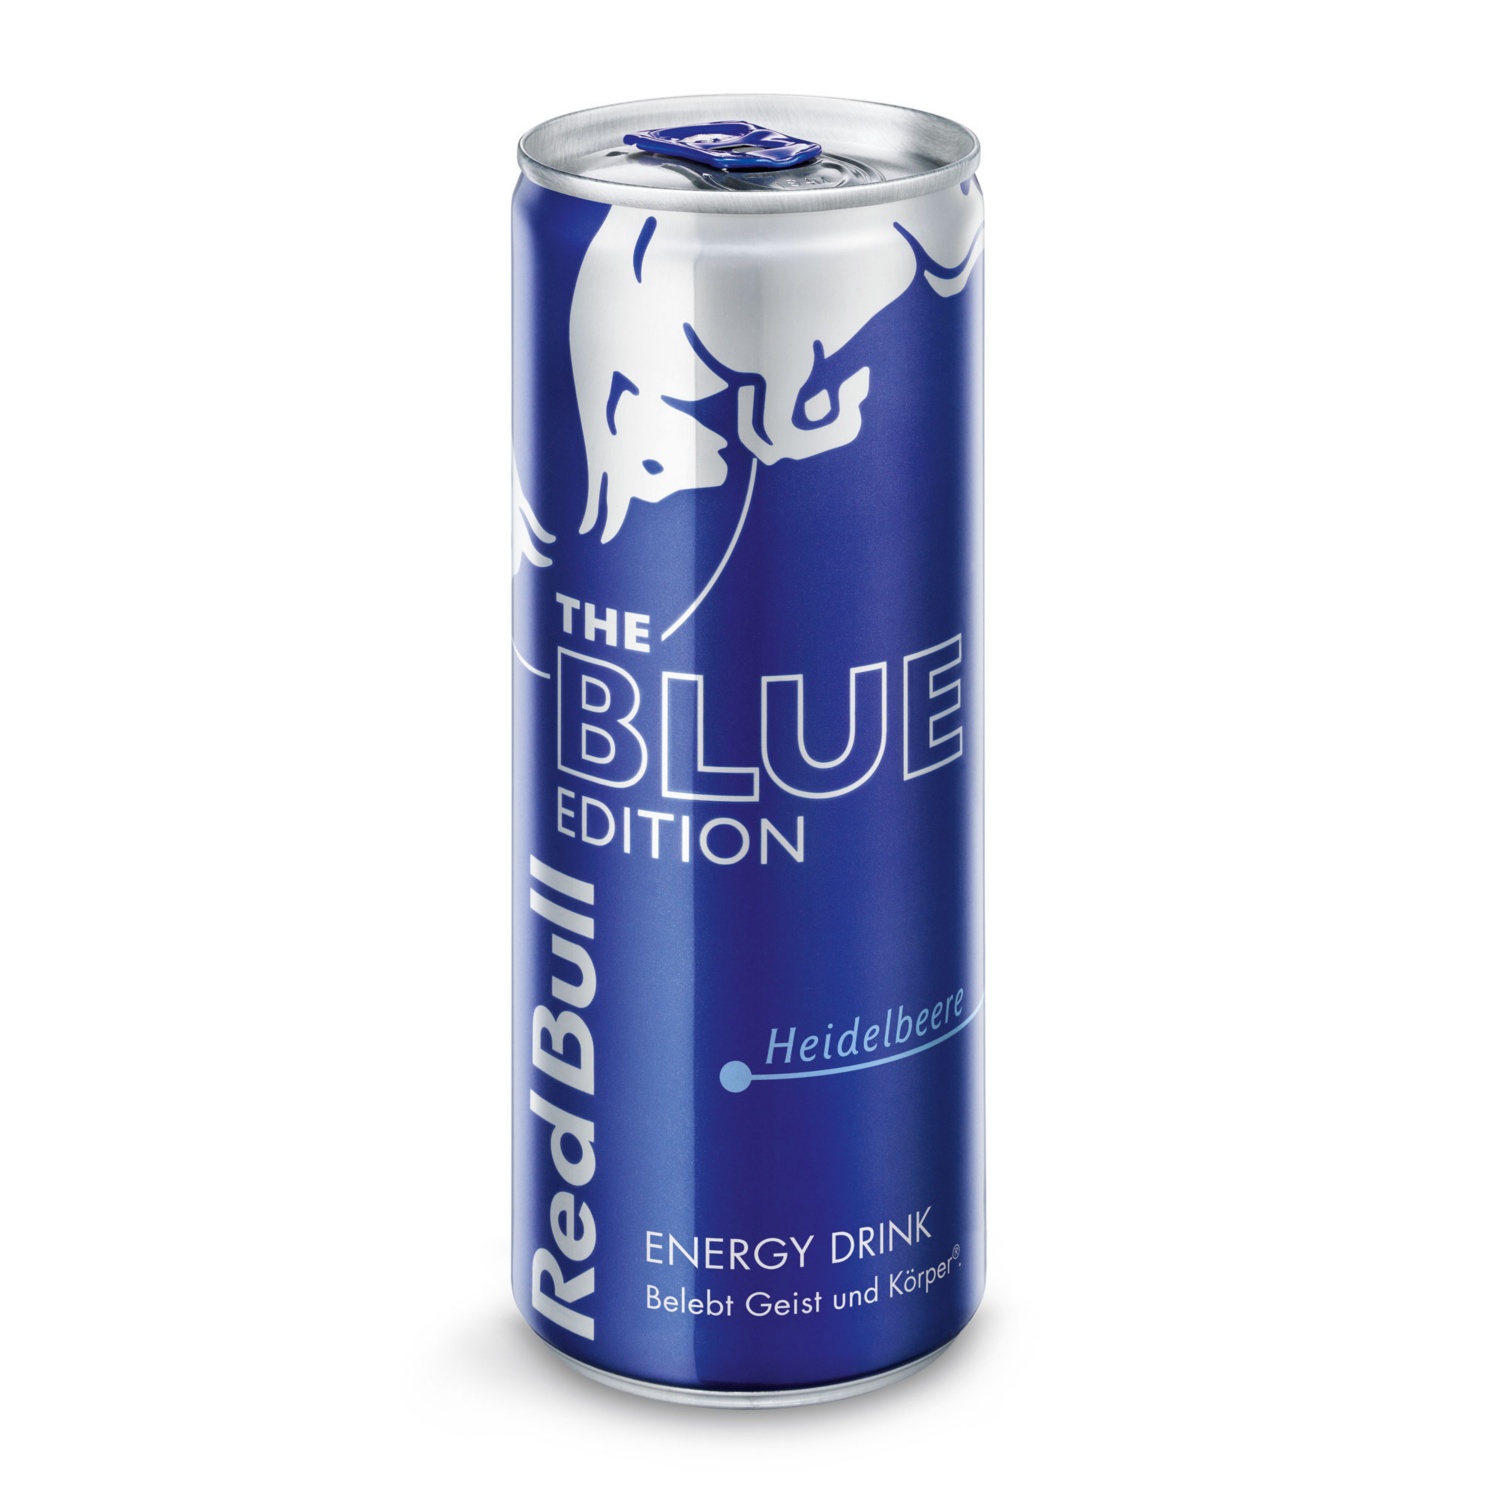 RED BULL Limited Edition, Heidelbeere